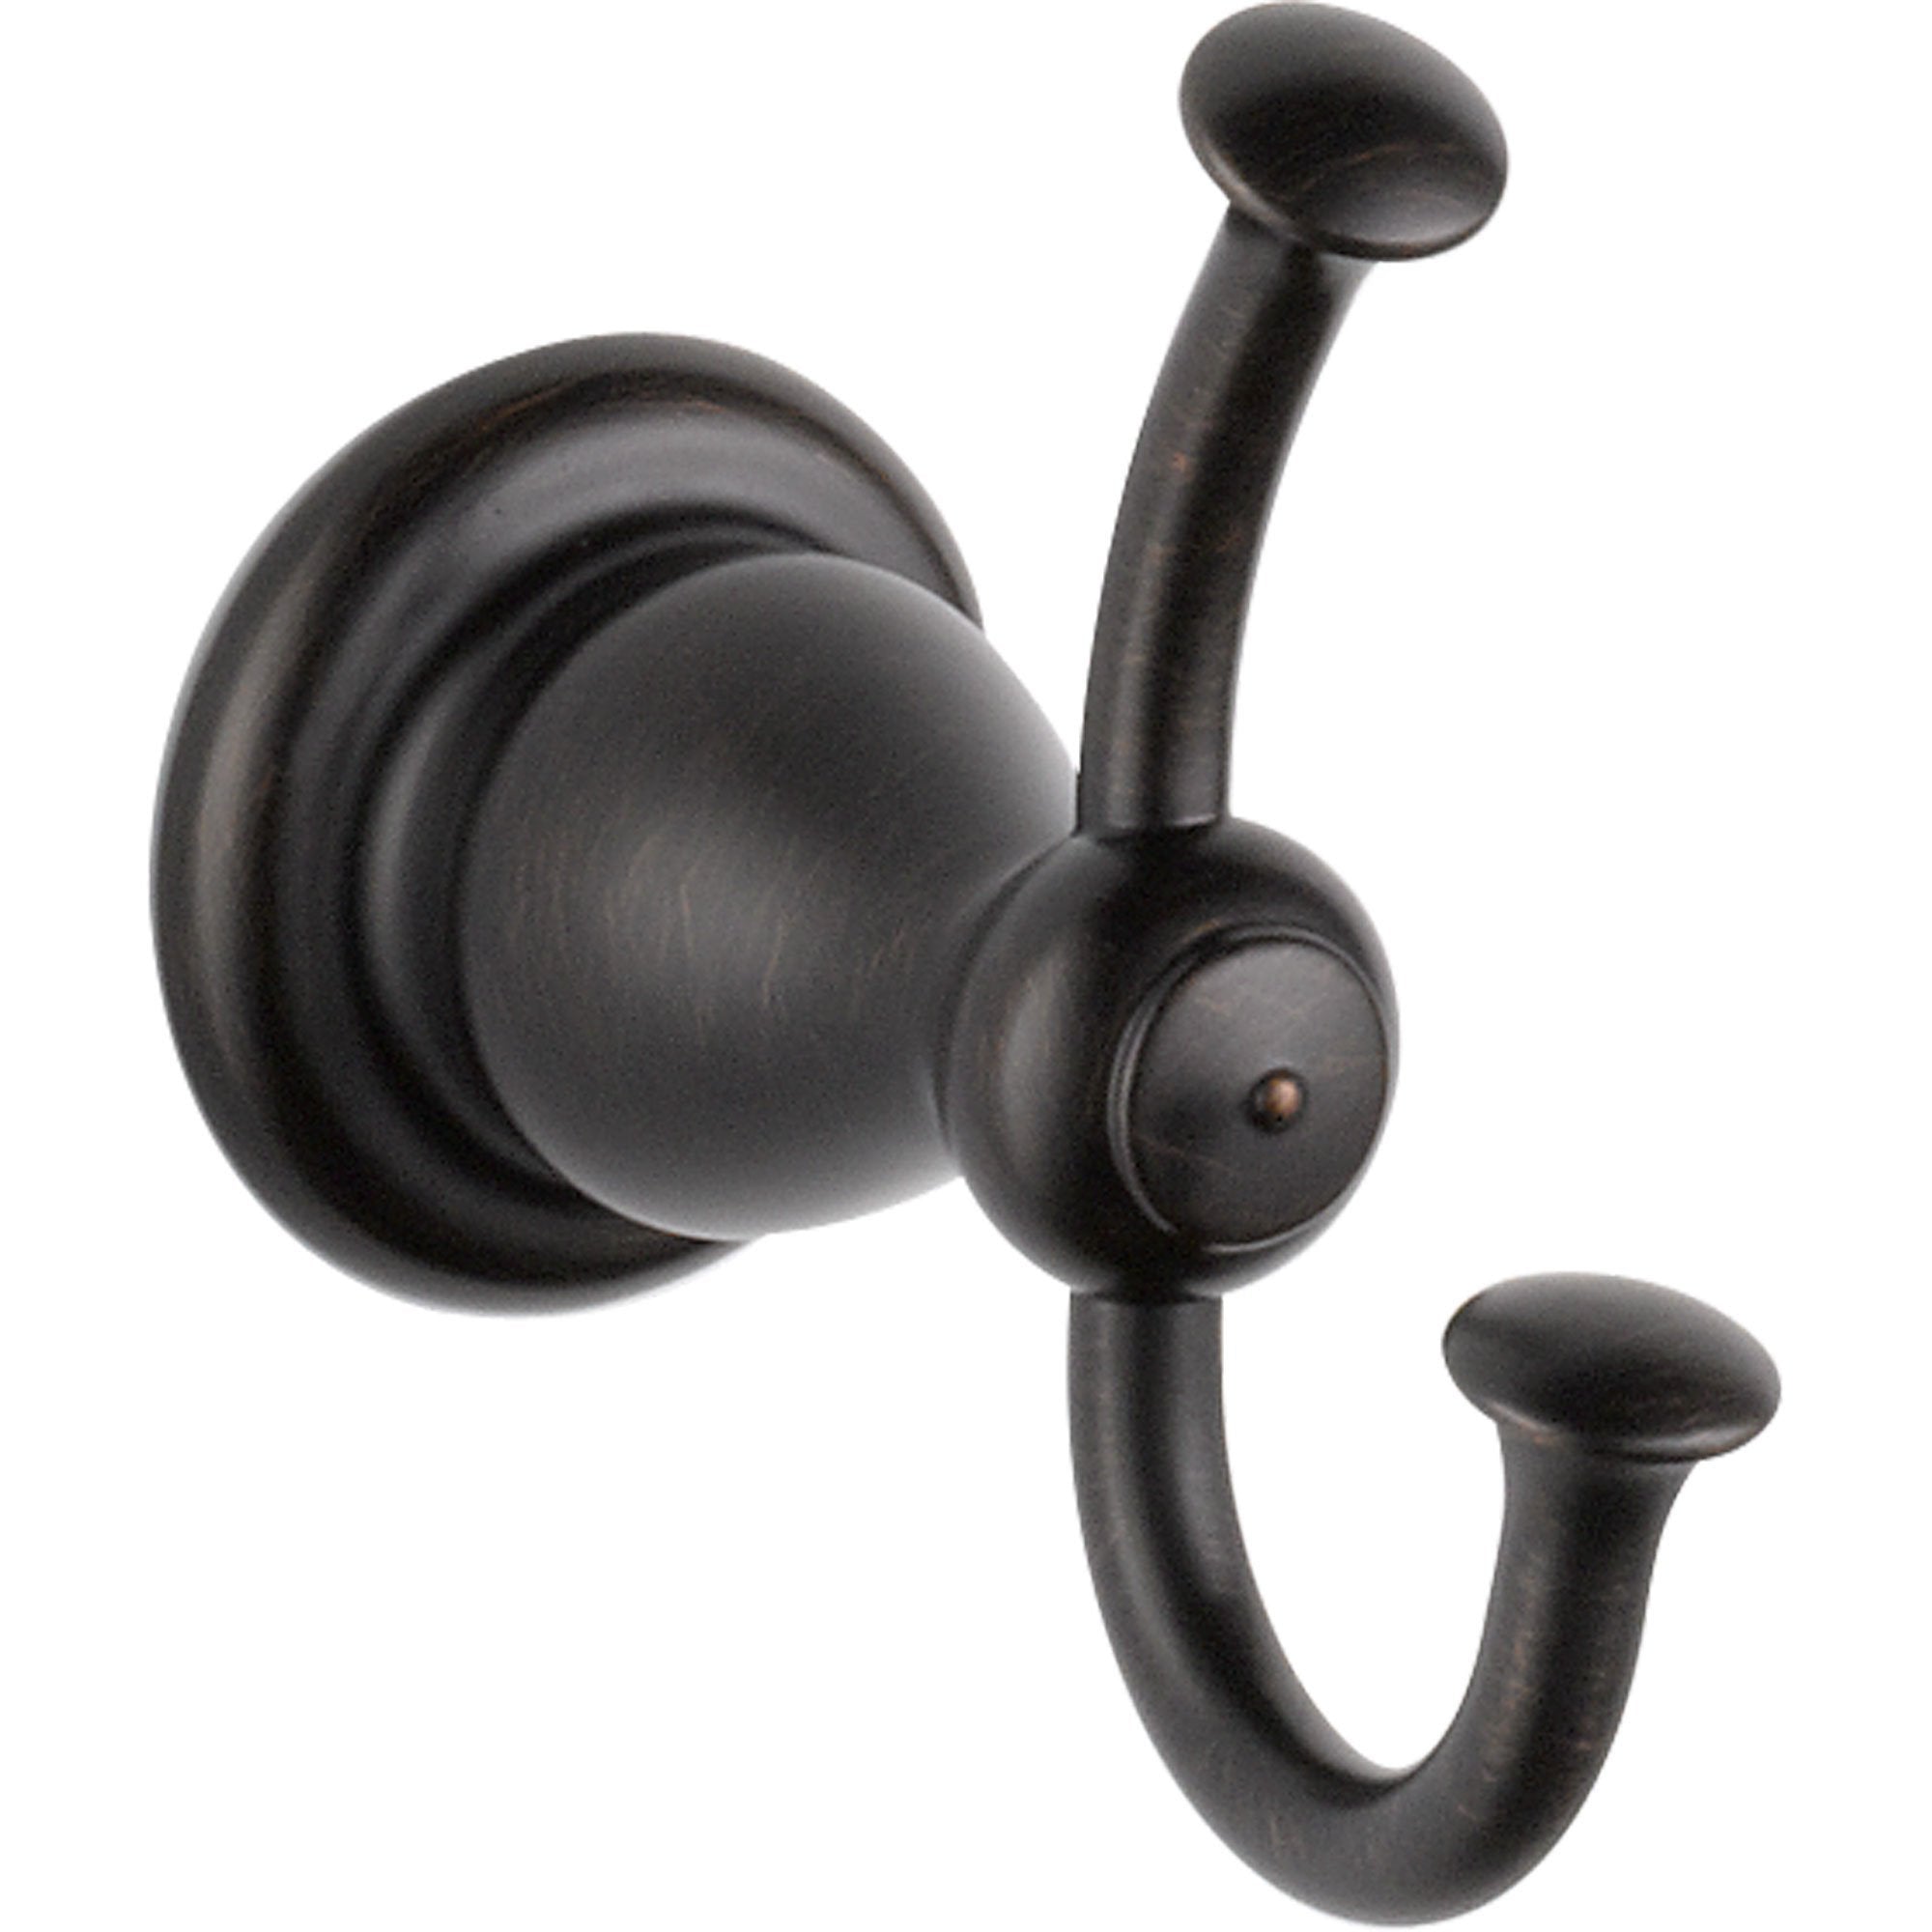 Robe Hooks - Get a Decorative Robe or Towel Hook for you Bathroom